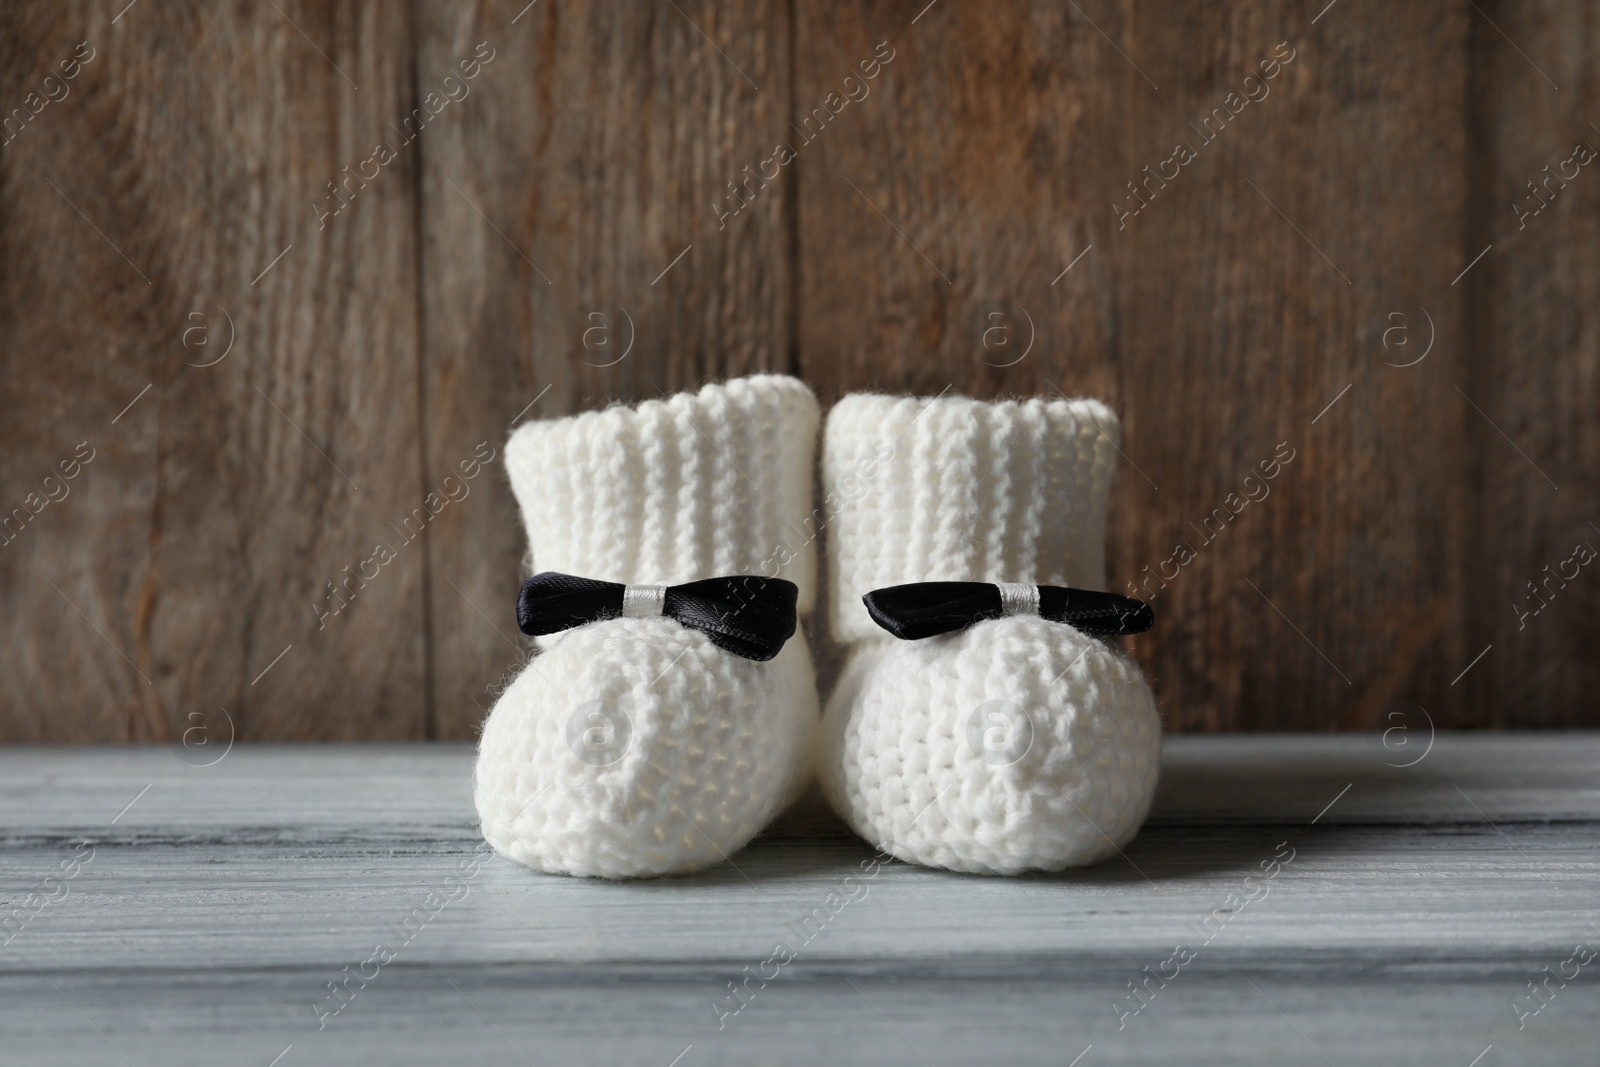 Photo of Handmade baby booties on table against wooden background